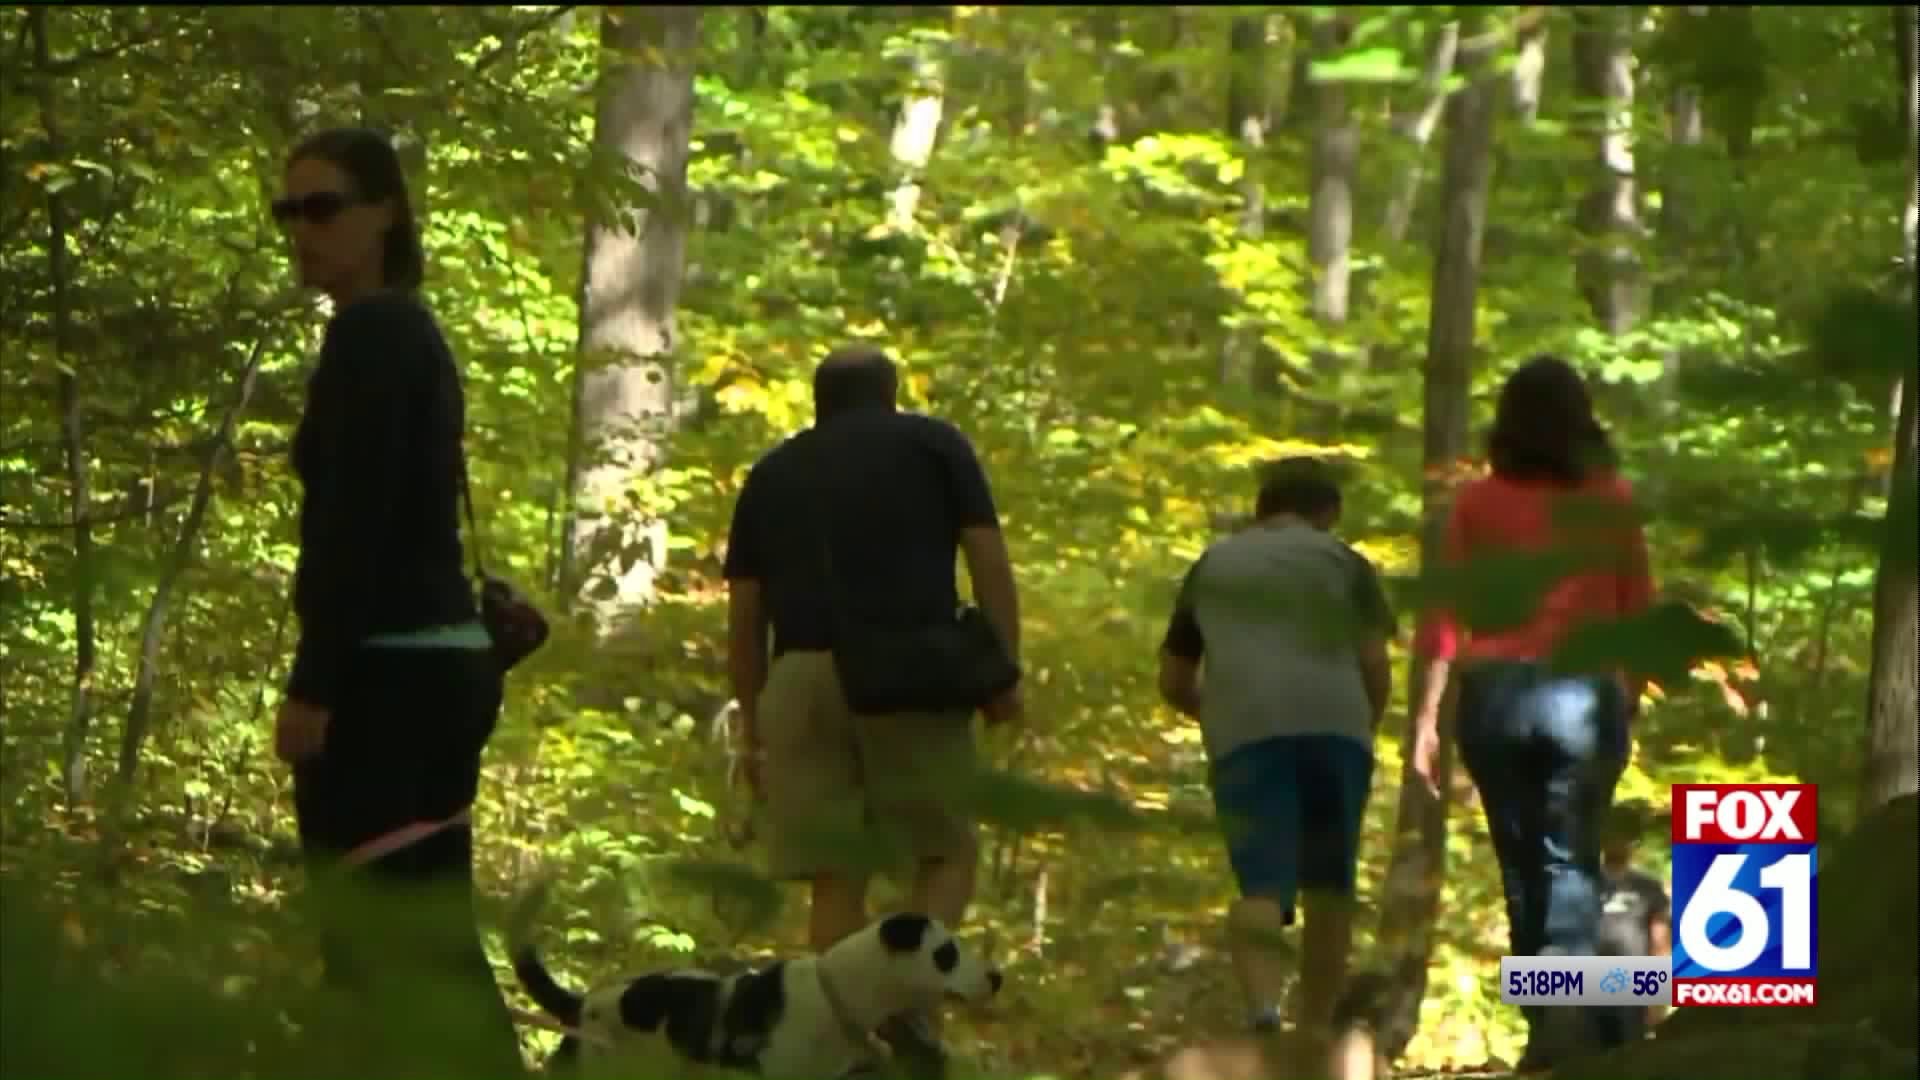 Sleeping giant state park to reopen